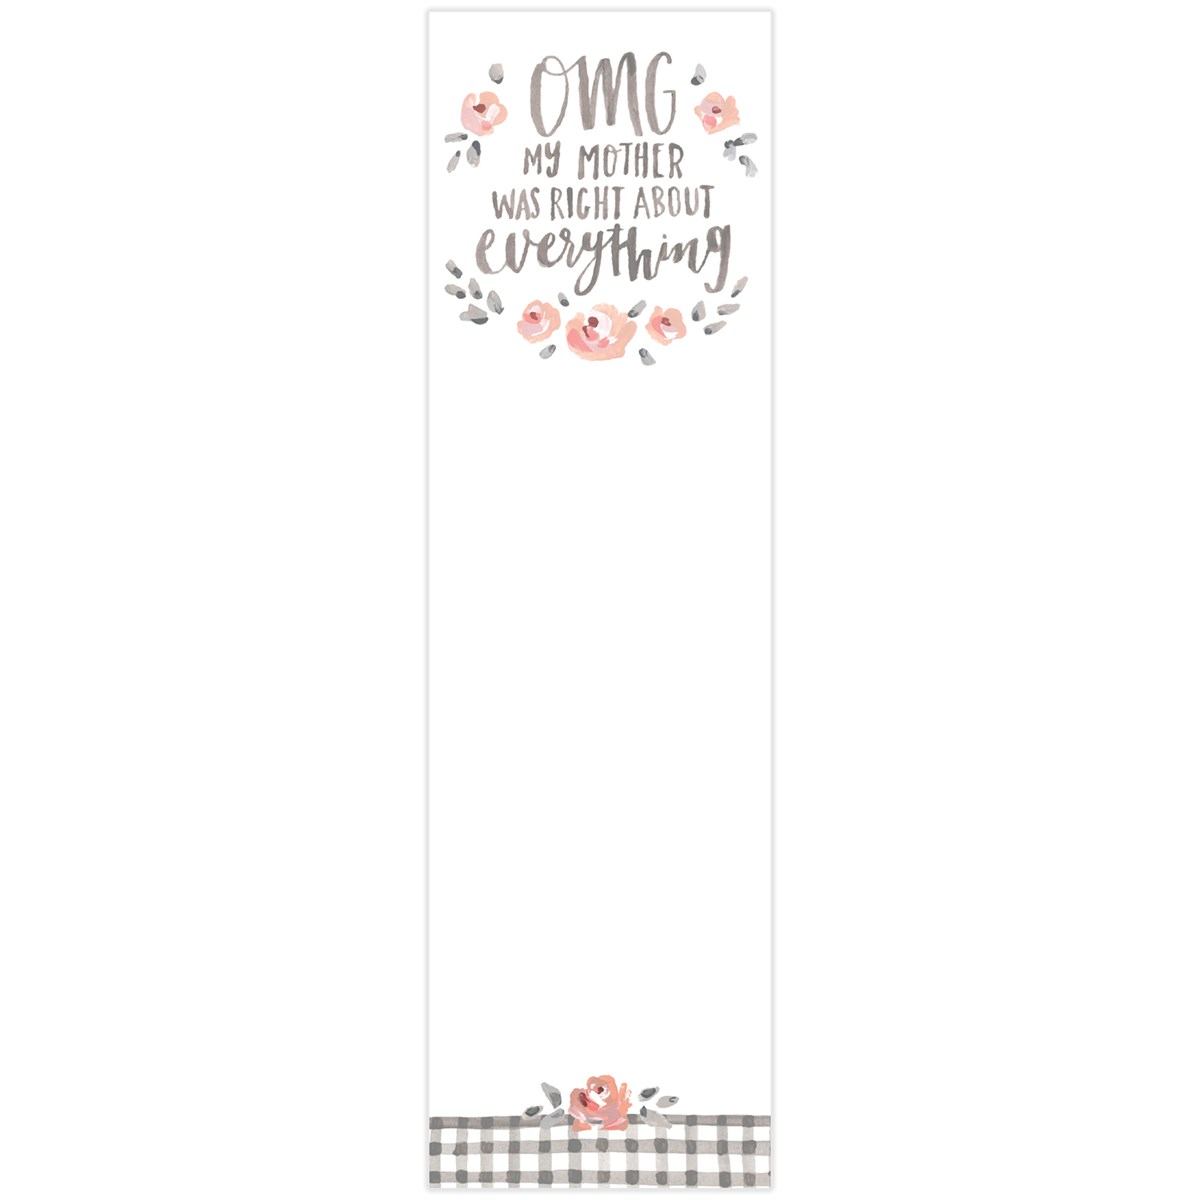 List Notepad - OMG My Mother Was Right - 2.75" x 9.50" x 0.25" - Paper, Magnet